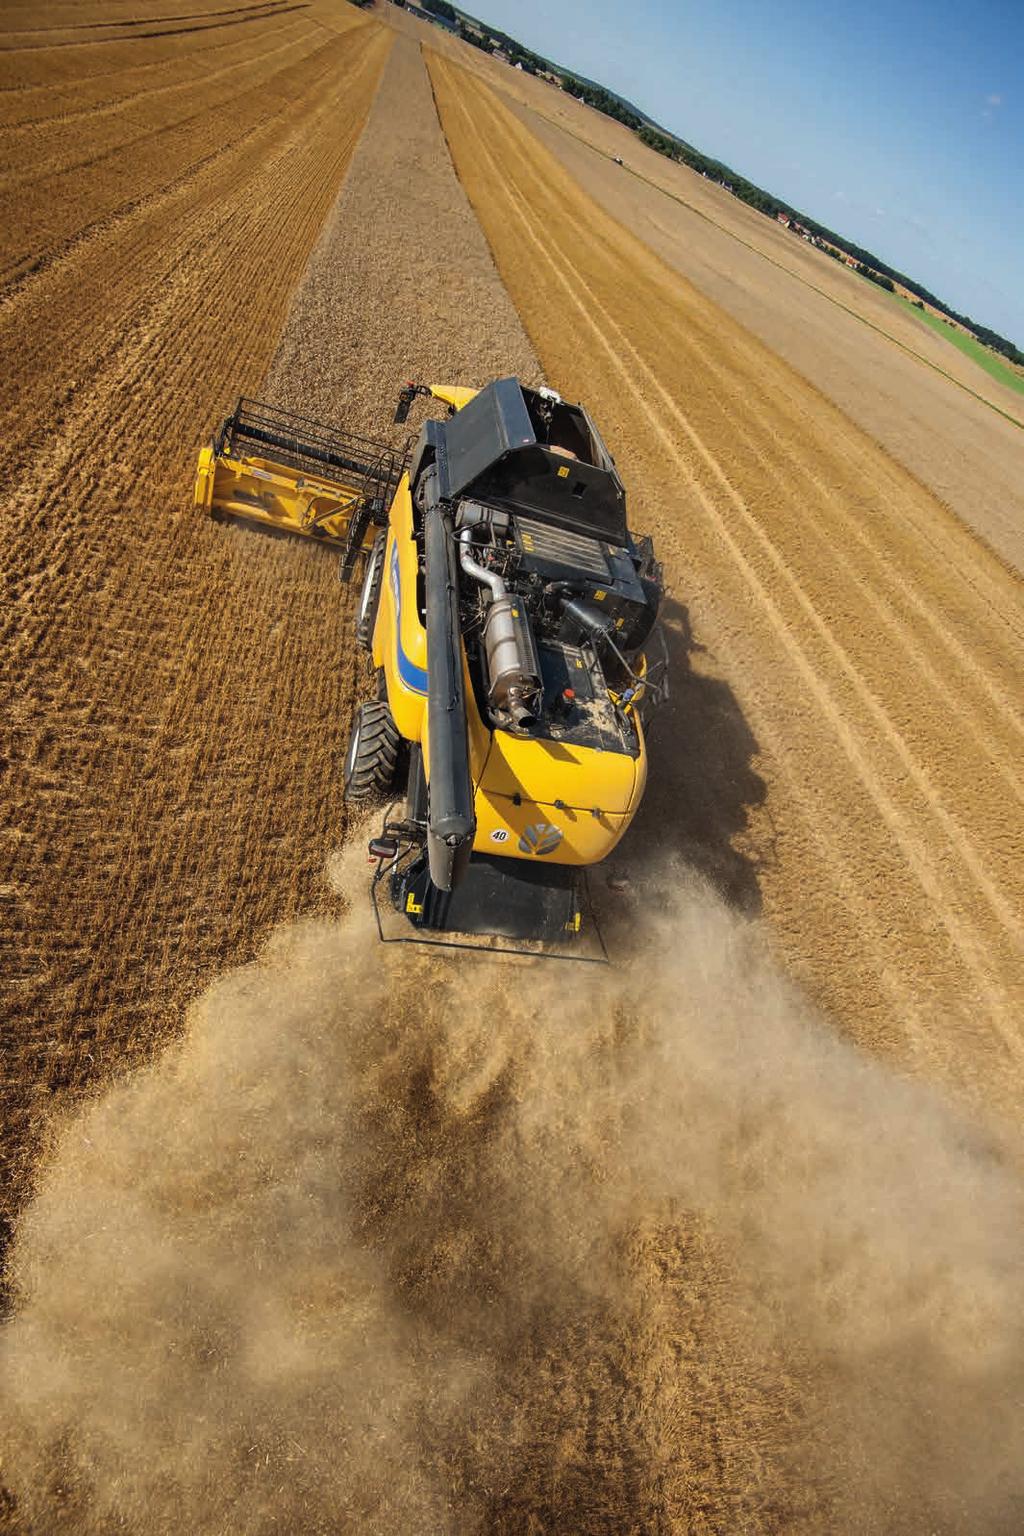 20 21 MANAGING RESIDUE FLEXIBLE SOLUTIONS THAT ARE RIGHT FOR YOUR OPERATION The CX8 Series offers complete and comprehensive residue management options that can be tailored for different types of